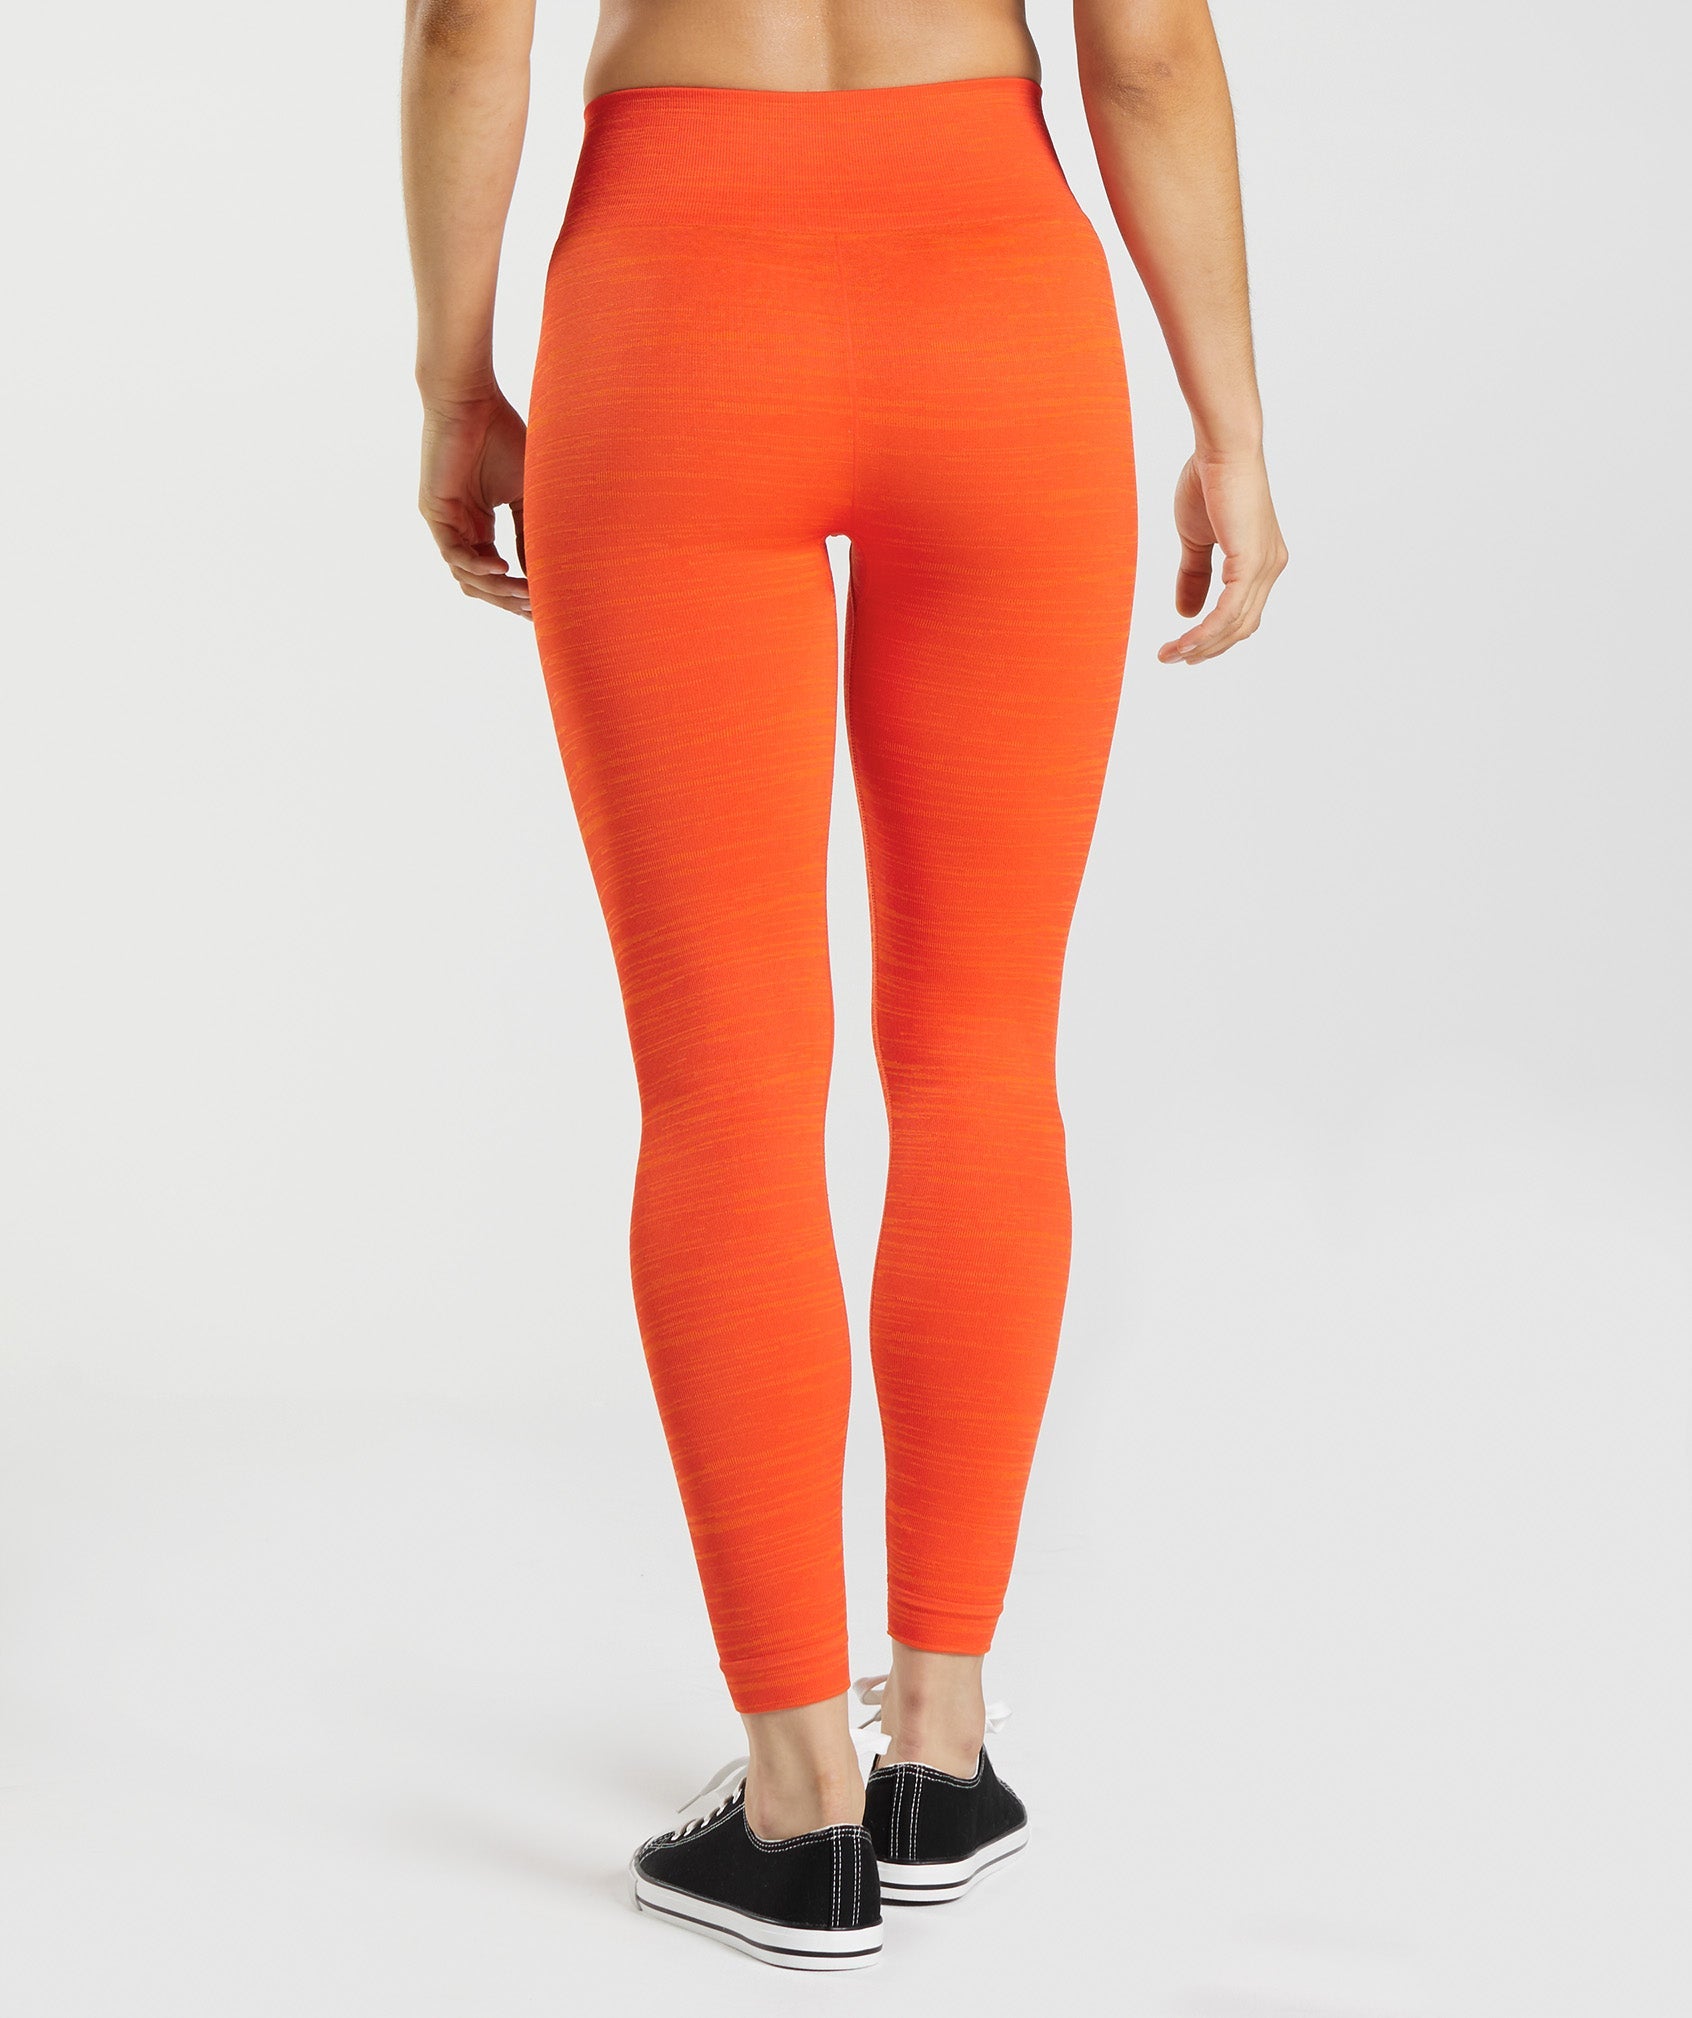 Gymshark Red Adapt Leggings - $35 (45% Off Retail) New With Tags - From  Bella